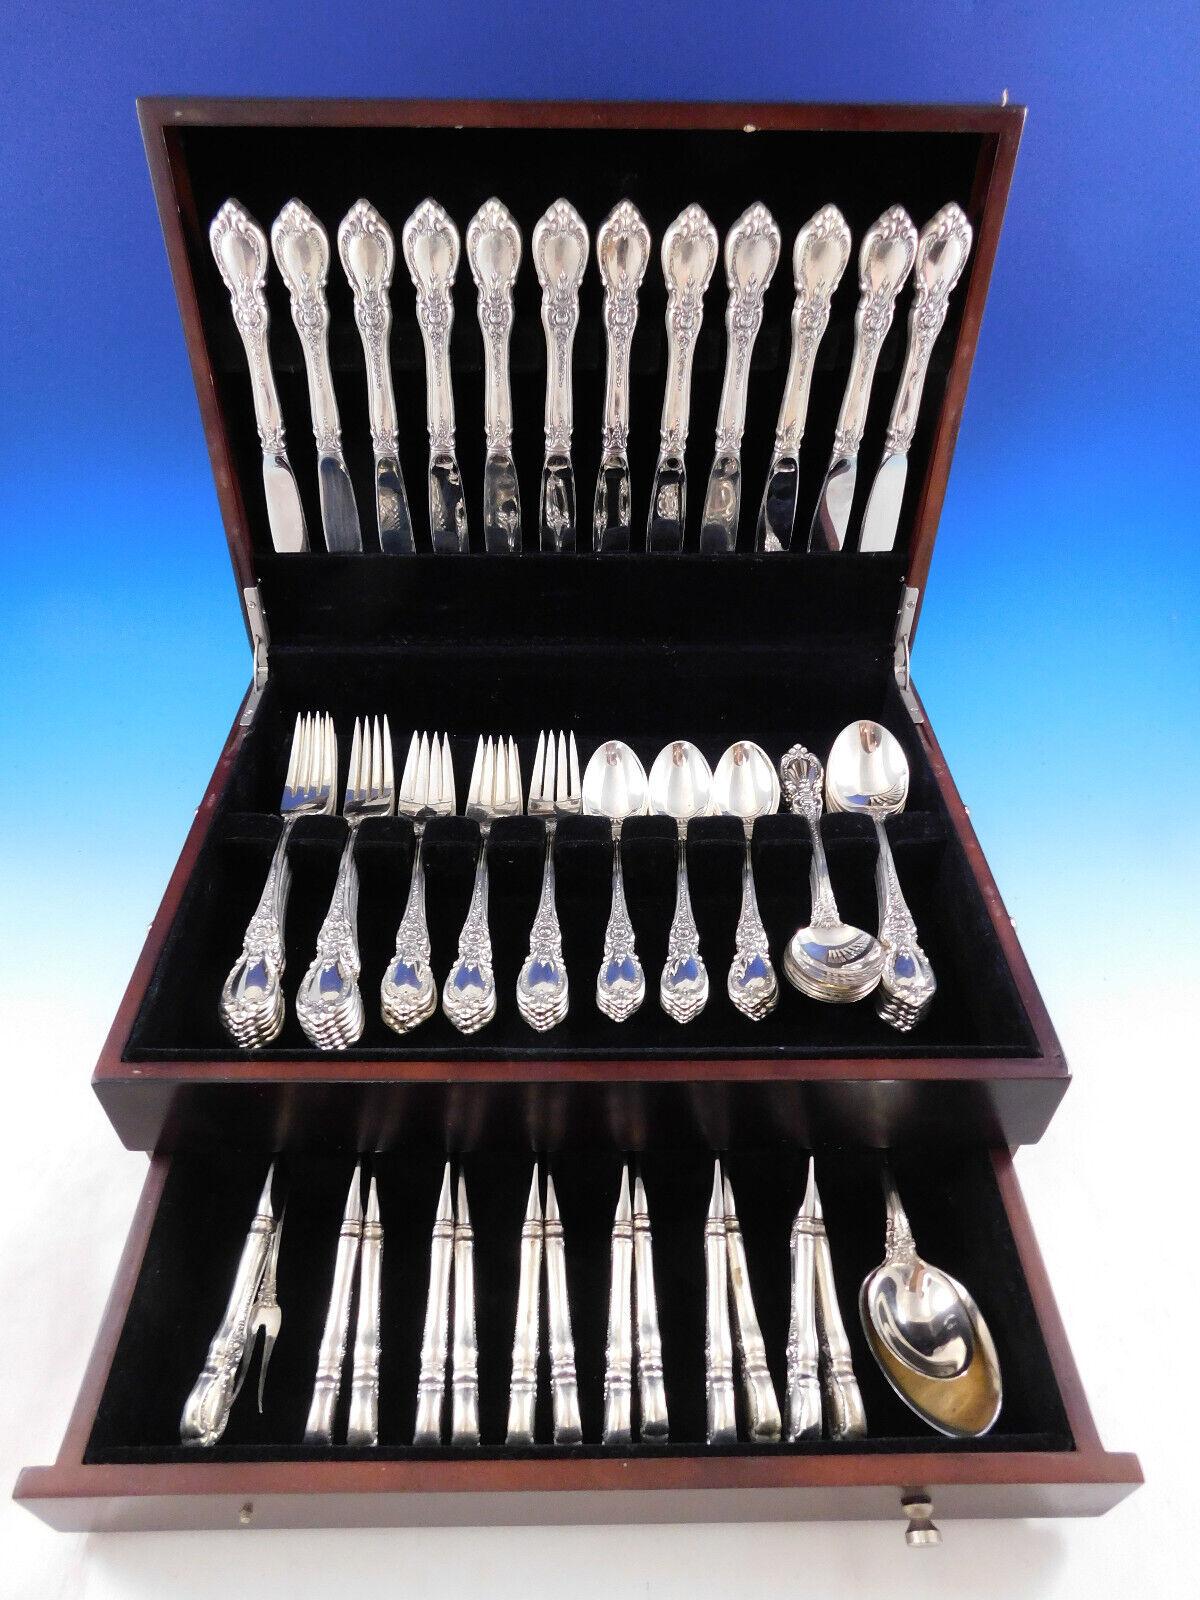 Superb Charlemagne by Towle Sterling Silver flatware set - 76 pieces. This set includes:
12 Knives, 9